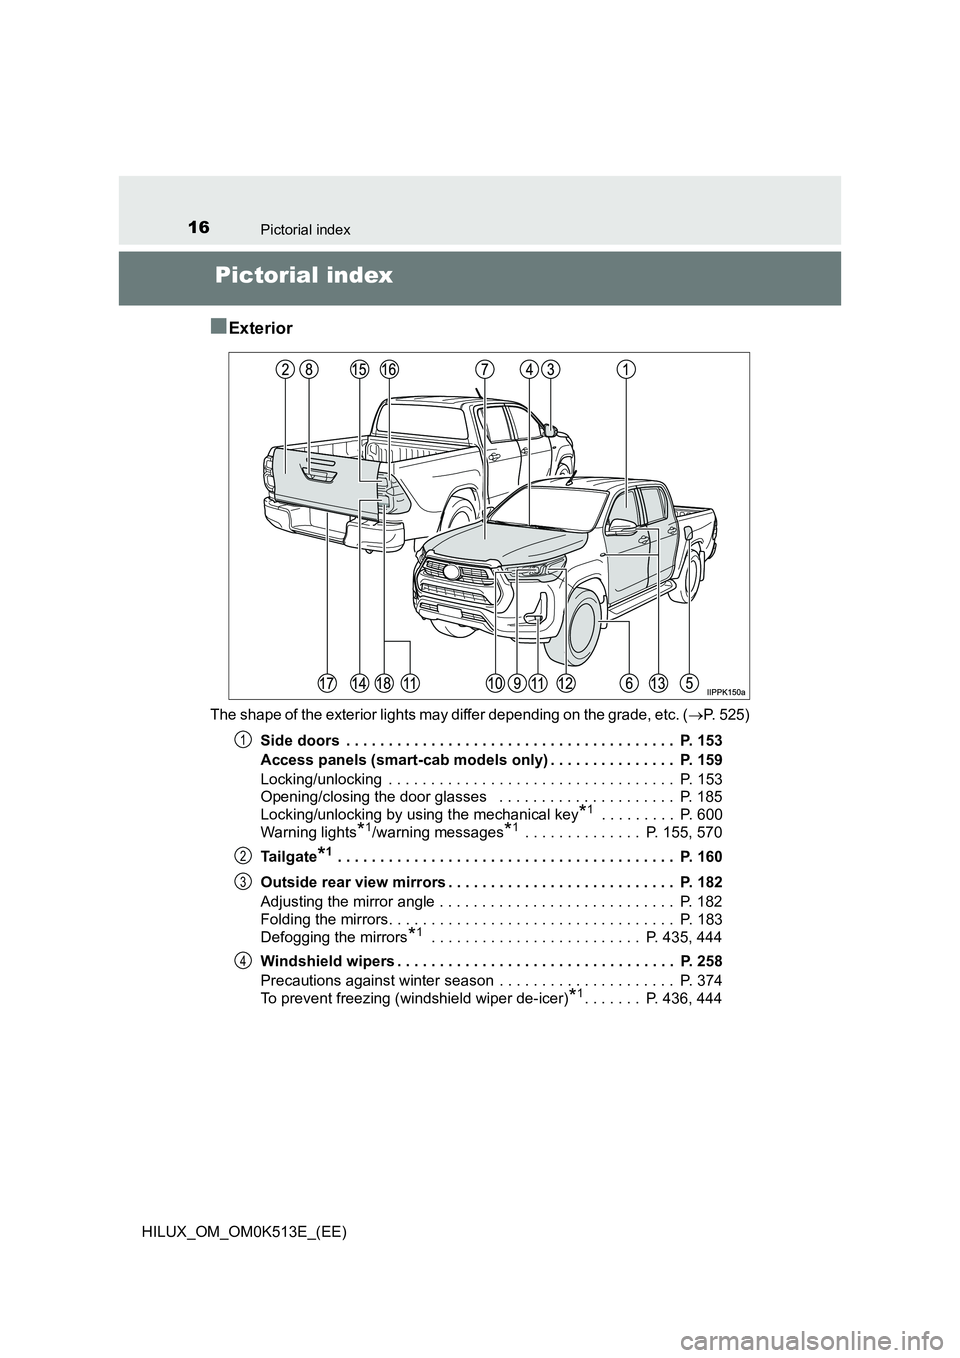 TOYOTA HILUX 2021  Owners Manual (in English) 16Pictorial index
HILUX_OM_OM0K513E_(EE)
Pictorial index 
�QExterior
The shape of the exterior lights may differ depending on the grade, etc. ( P. 525) 
Side doors  . . . . . . . . . . . . . . . . 